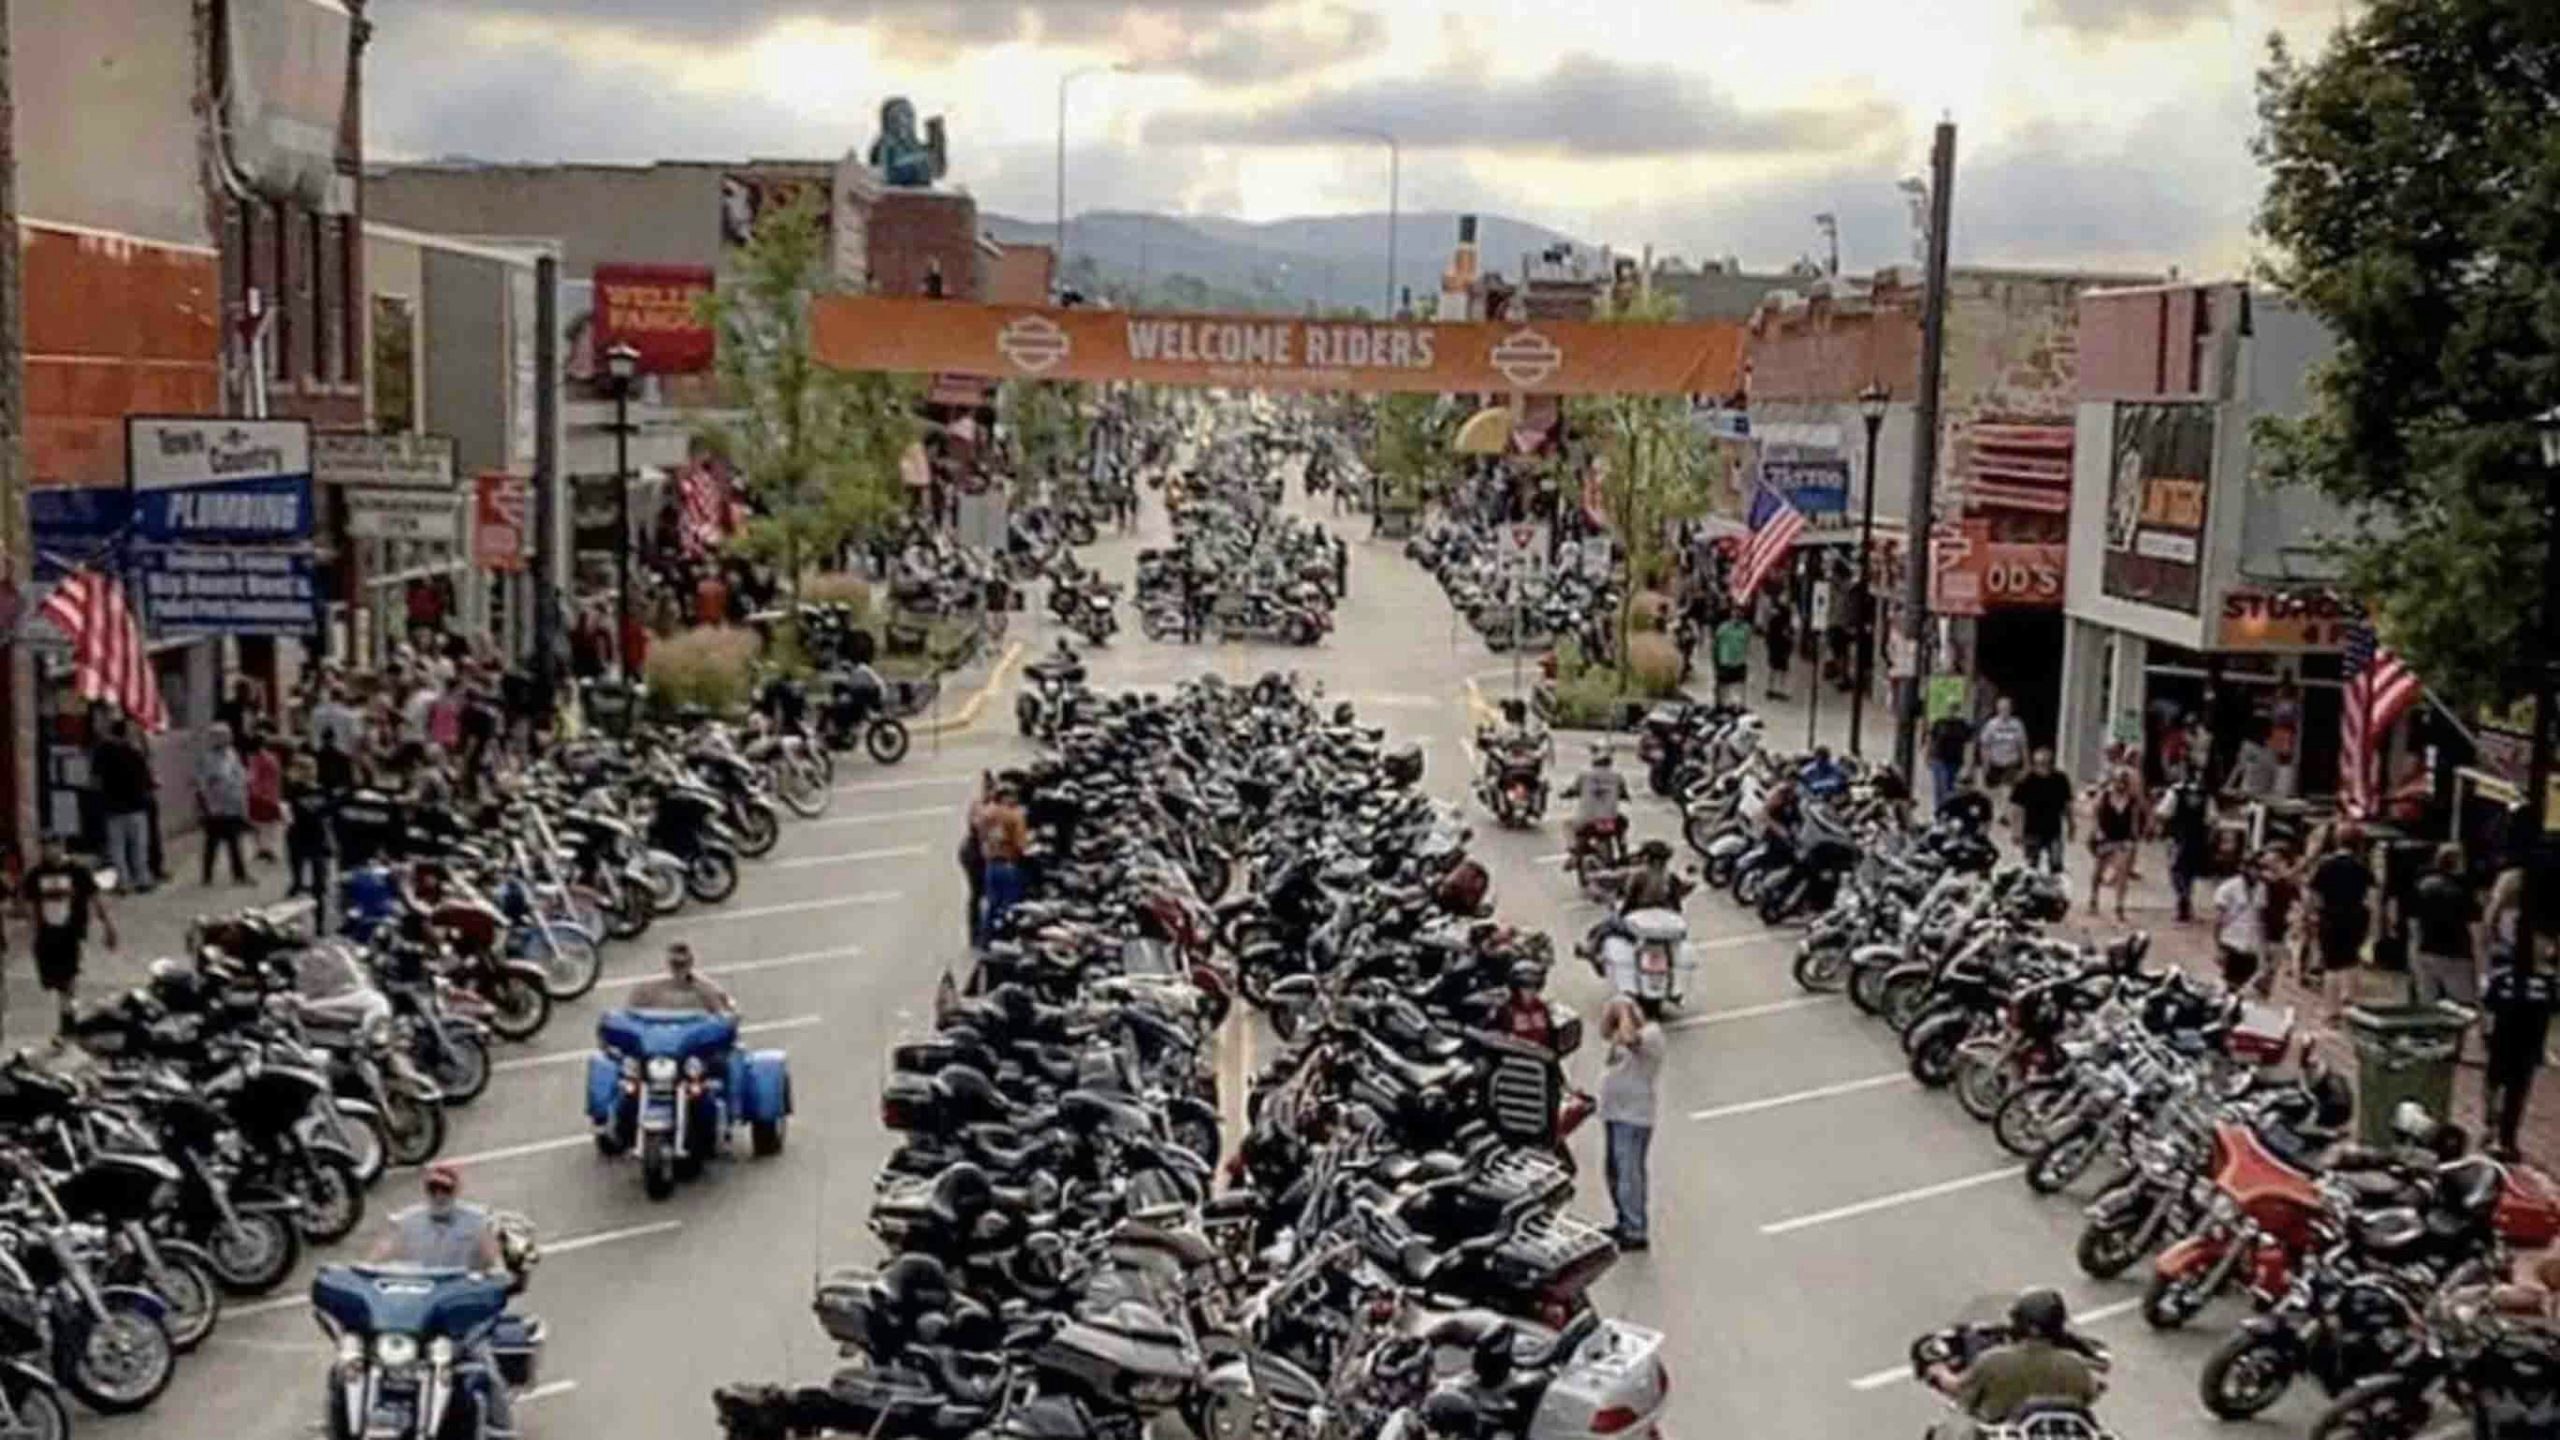 Annual Sturgis Motorcycle Rally Will Happen (With Some Changes) Your Wyoming News Source